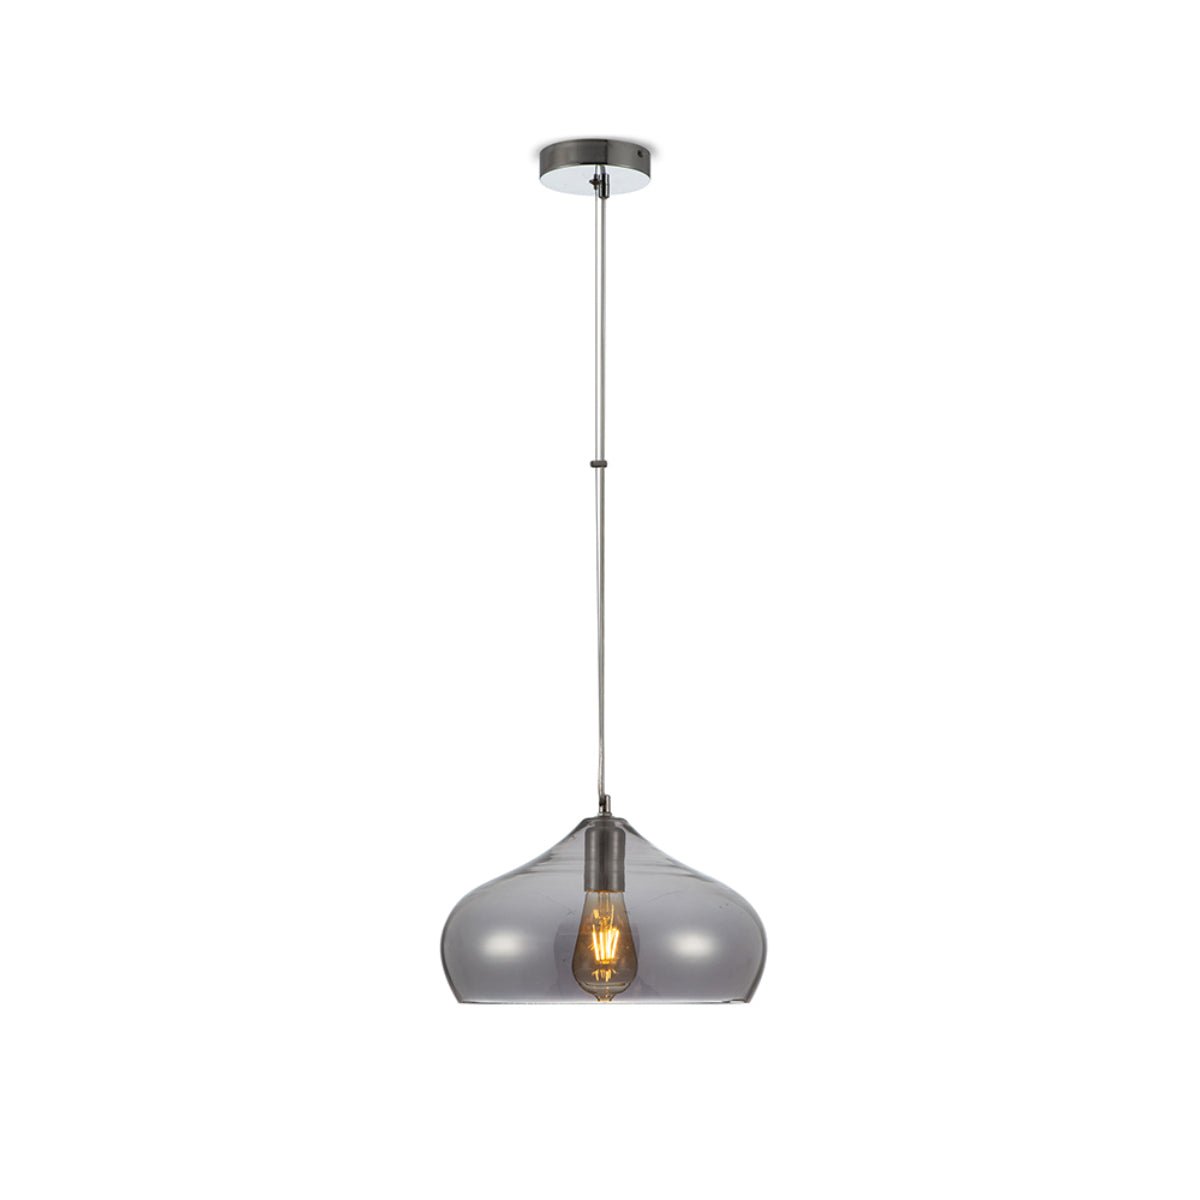 Main image of Smoky Glass India Dome Pendant Ceiling Light with E27 | TEKLED 150-15054